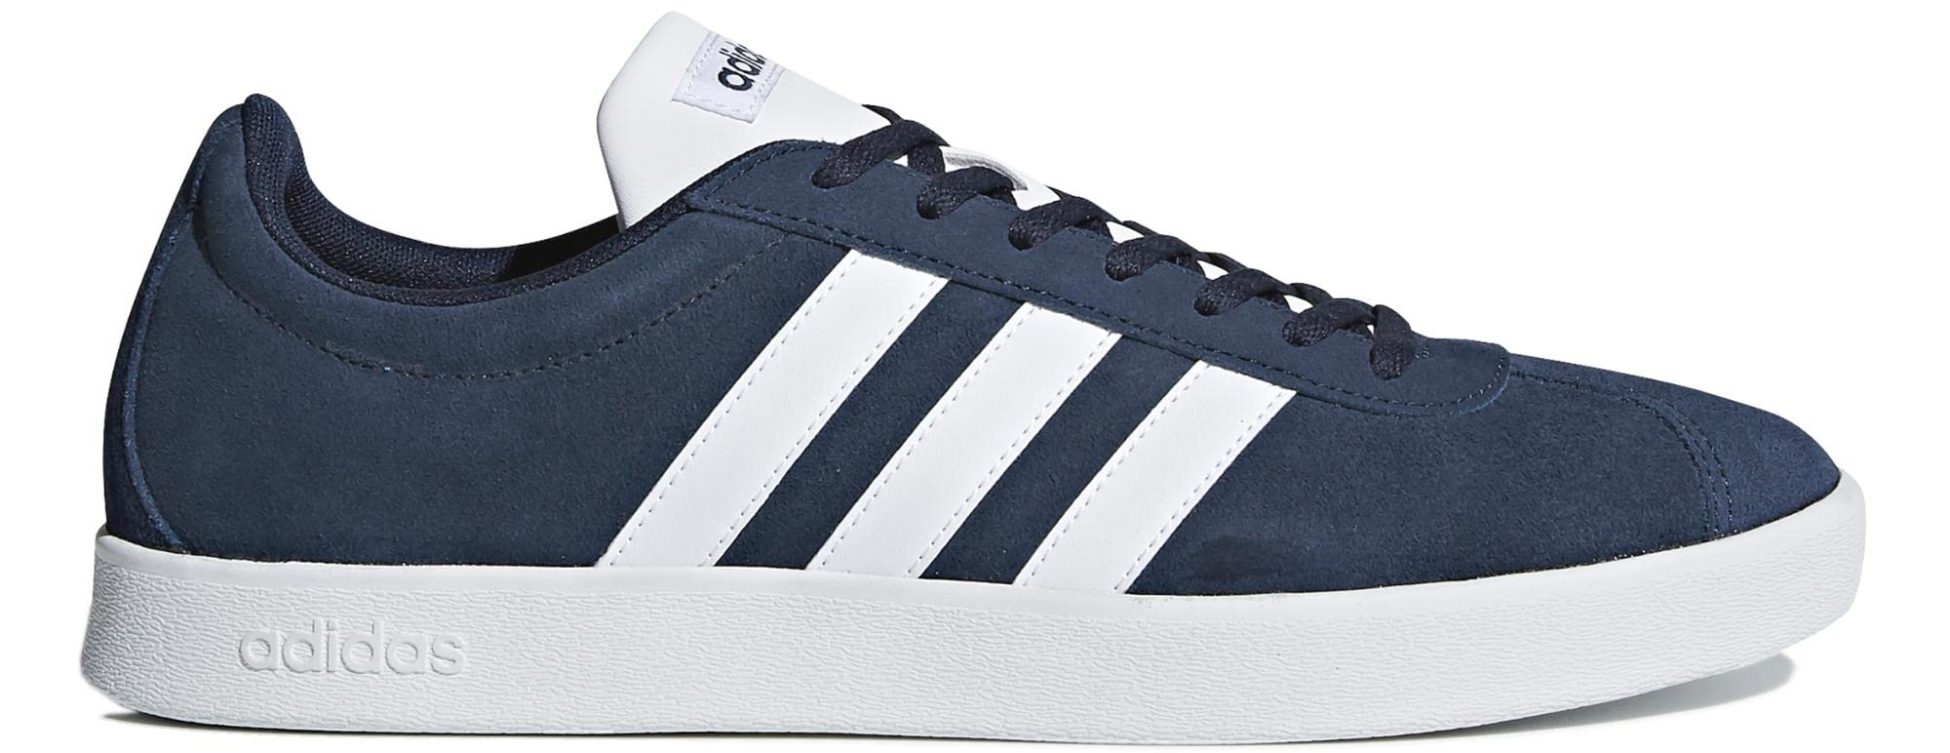 Sideboard hundred Roux adidas vl court 2.0 damen beige tooth pyramid colony